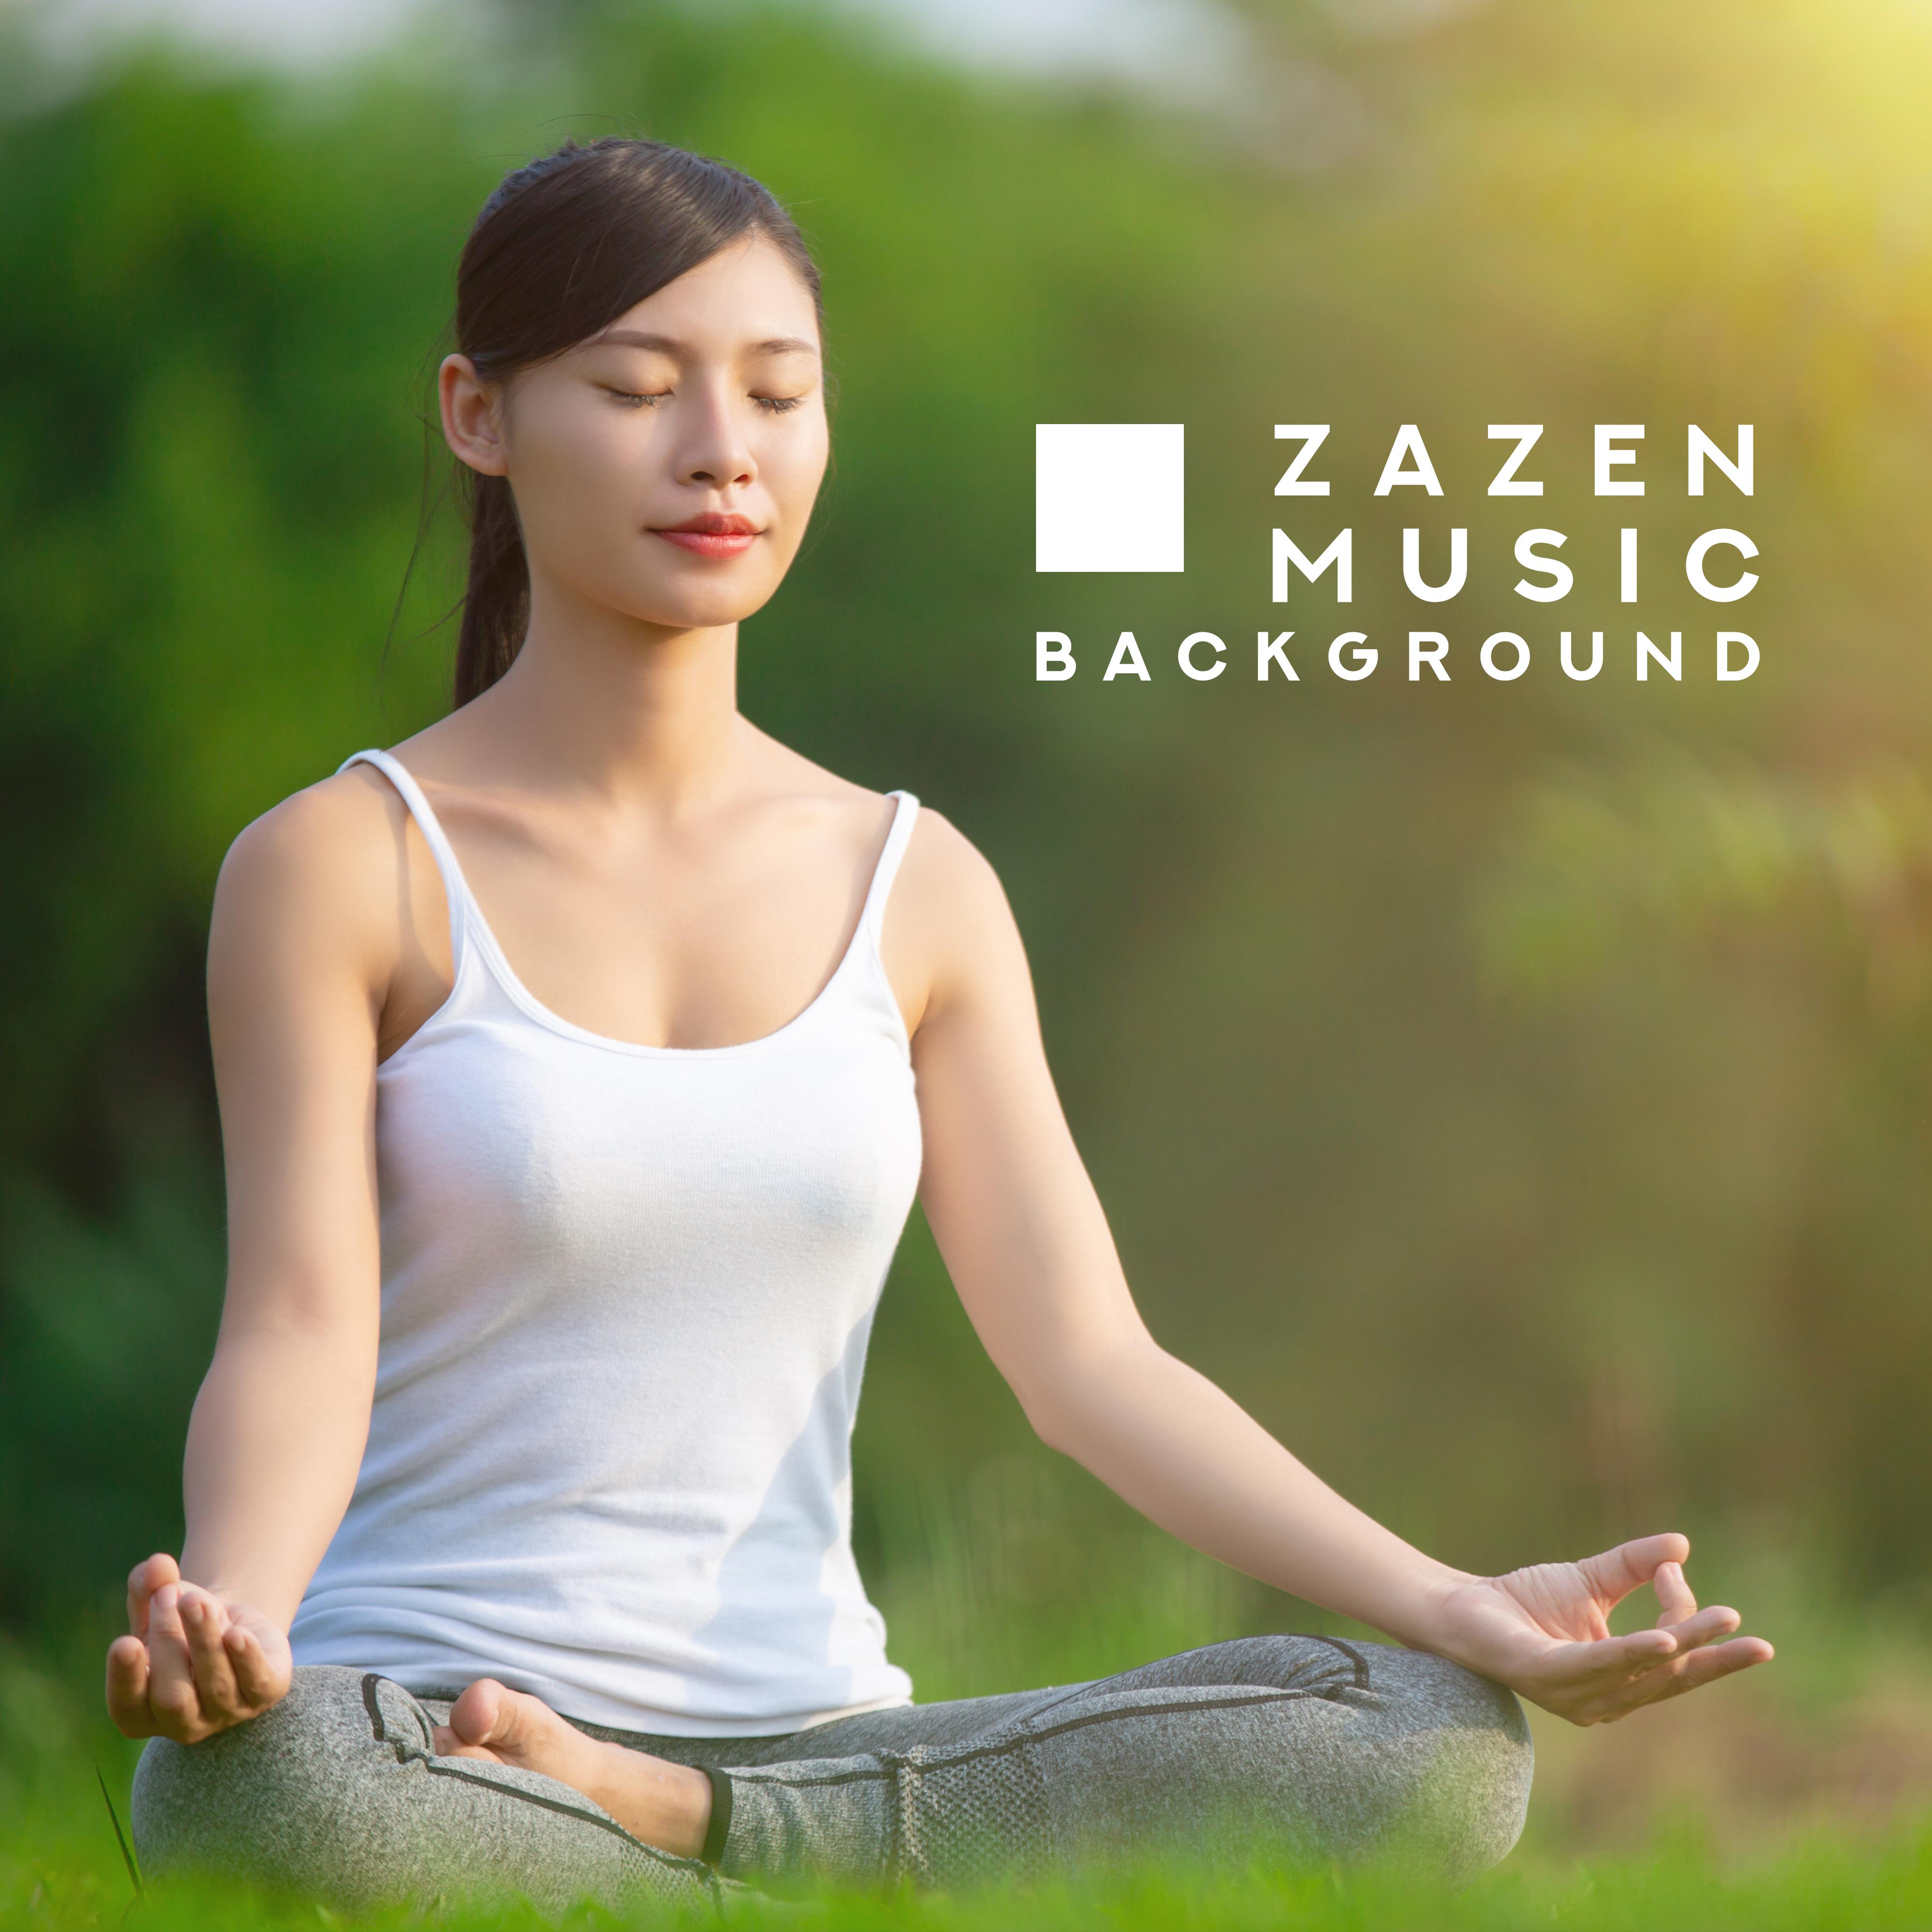 Zazen Music Background - Meditation Music to Achieve Enlightenment, Free Yourself from Suffering, Vanity and the Desire to Profit